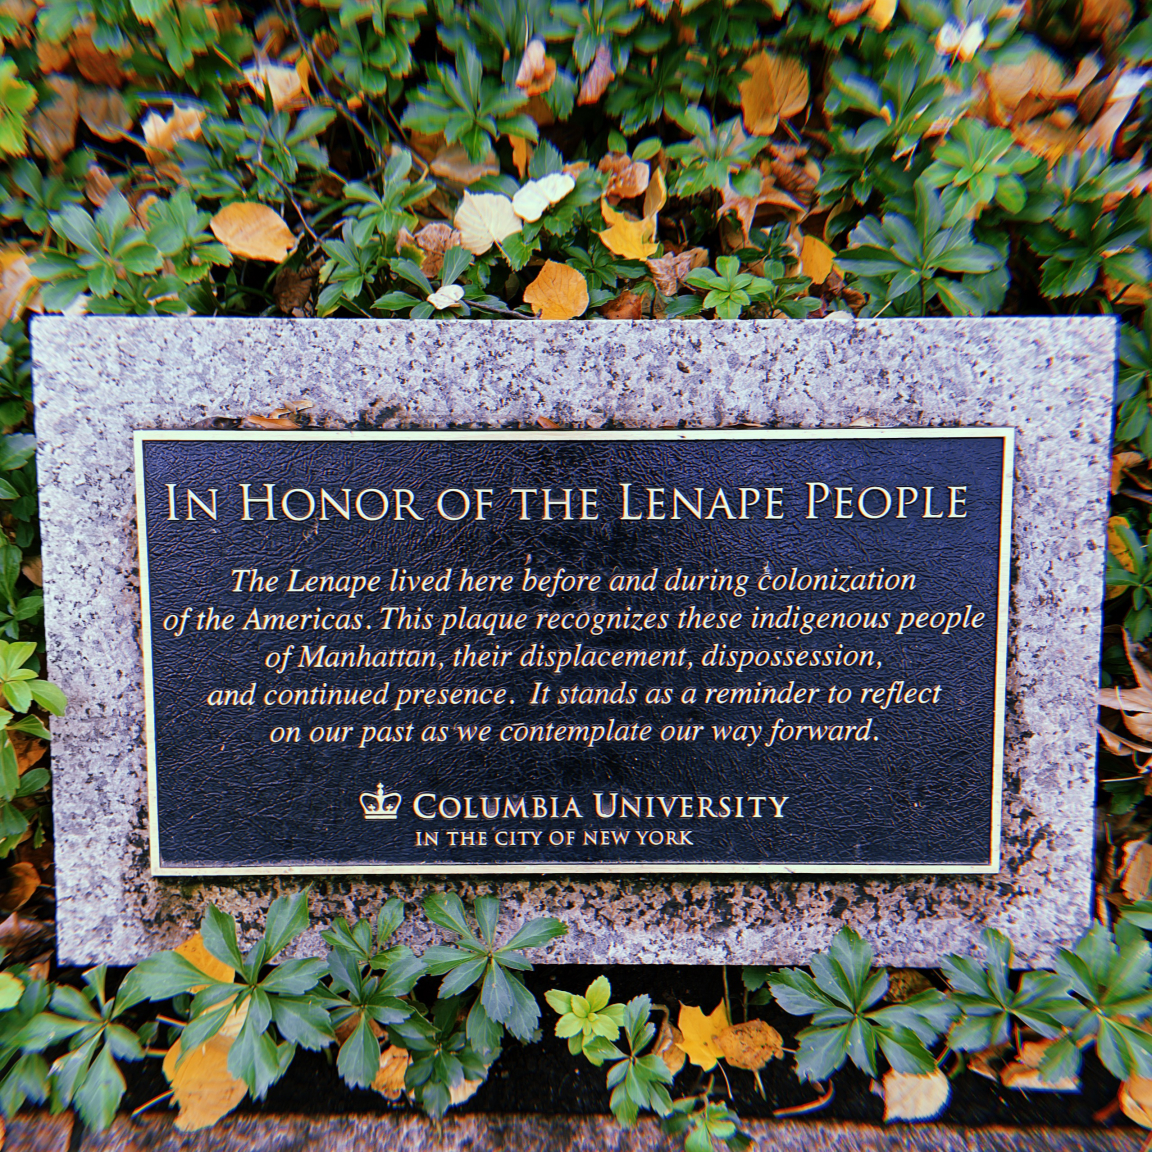 Plaque which reads "In Honor of the Lenape People"